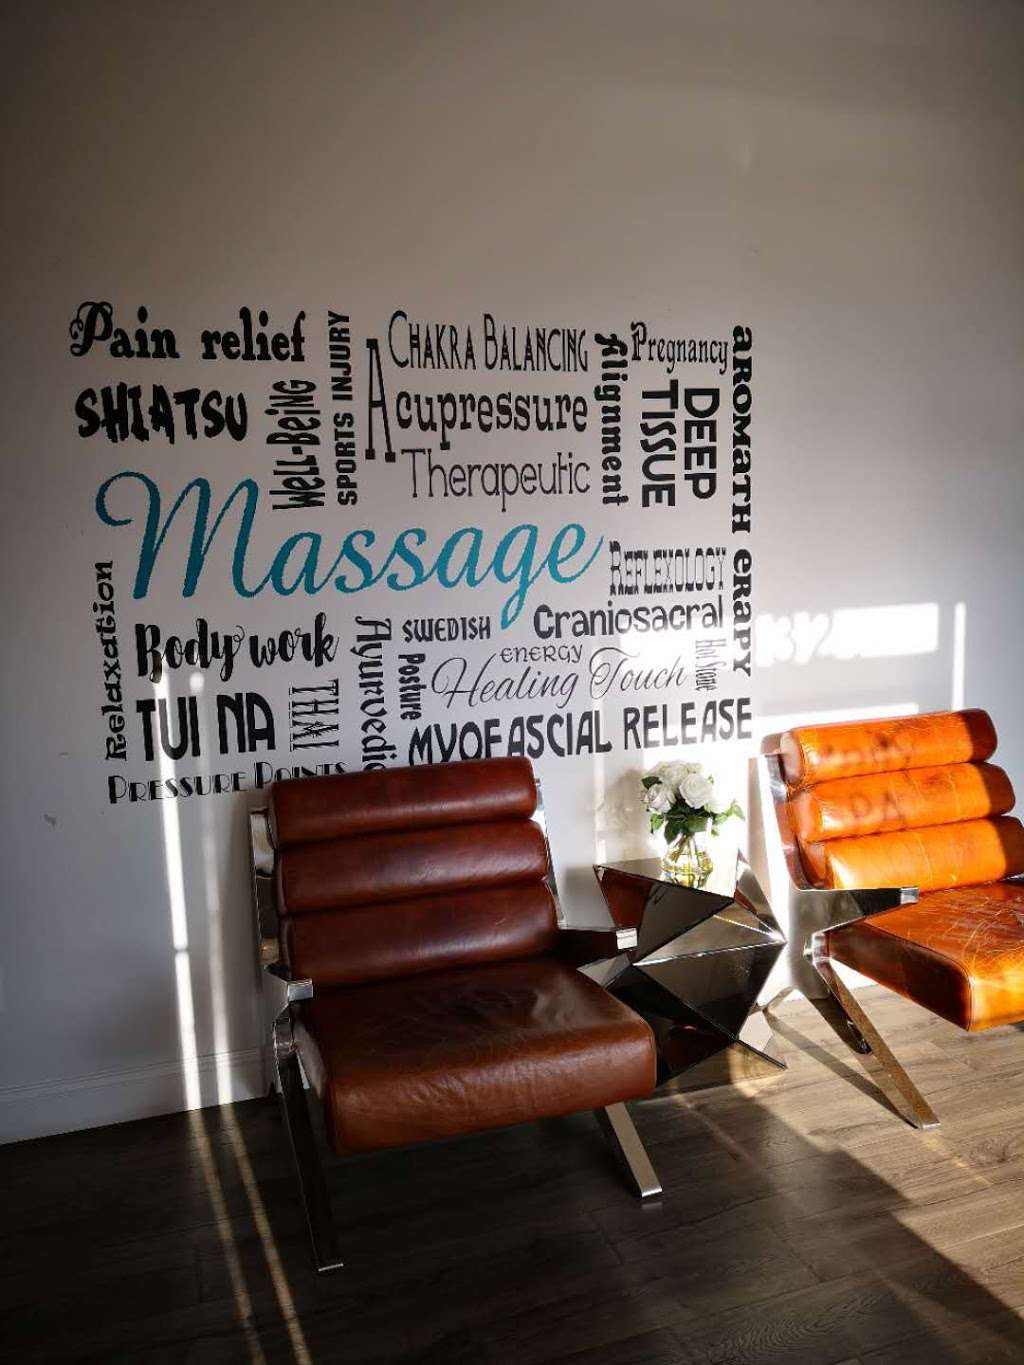 Serenity SPA | 132 Perry Rd, Plainfield, IN 46168, USA | Phone: (317) 268-4787